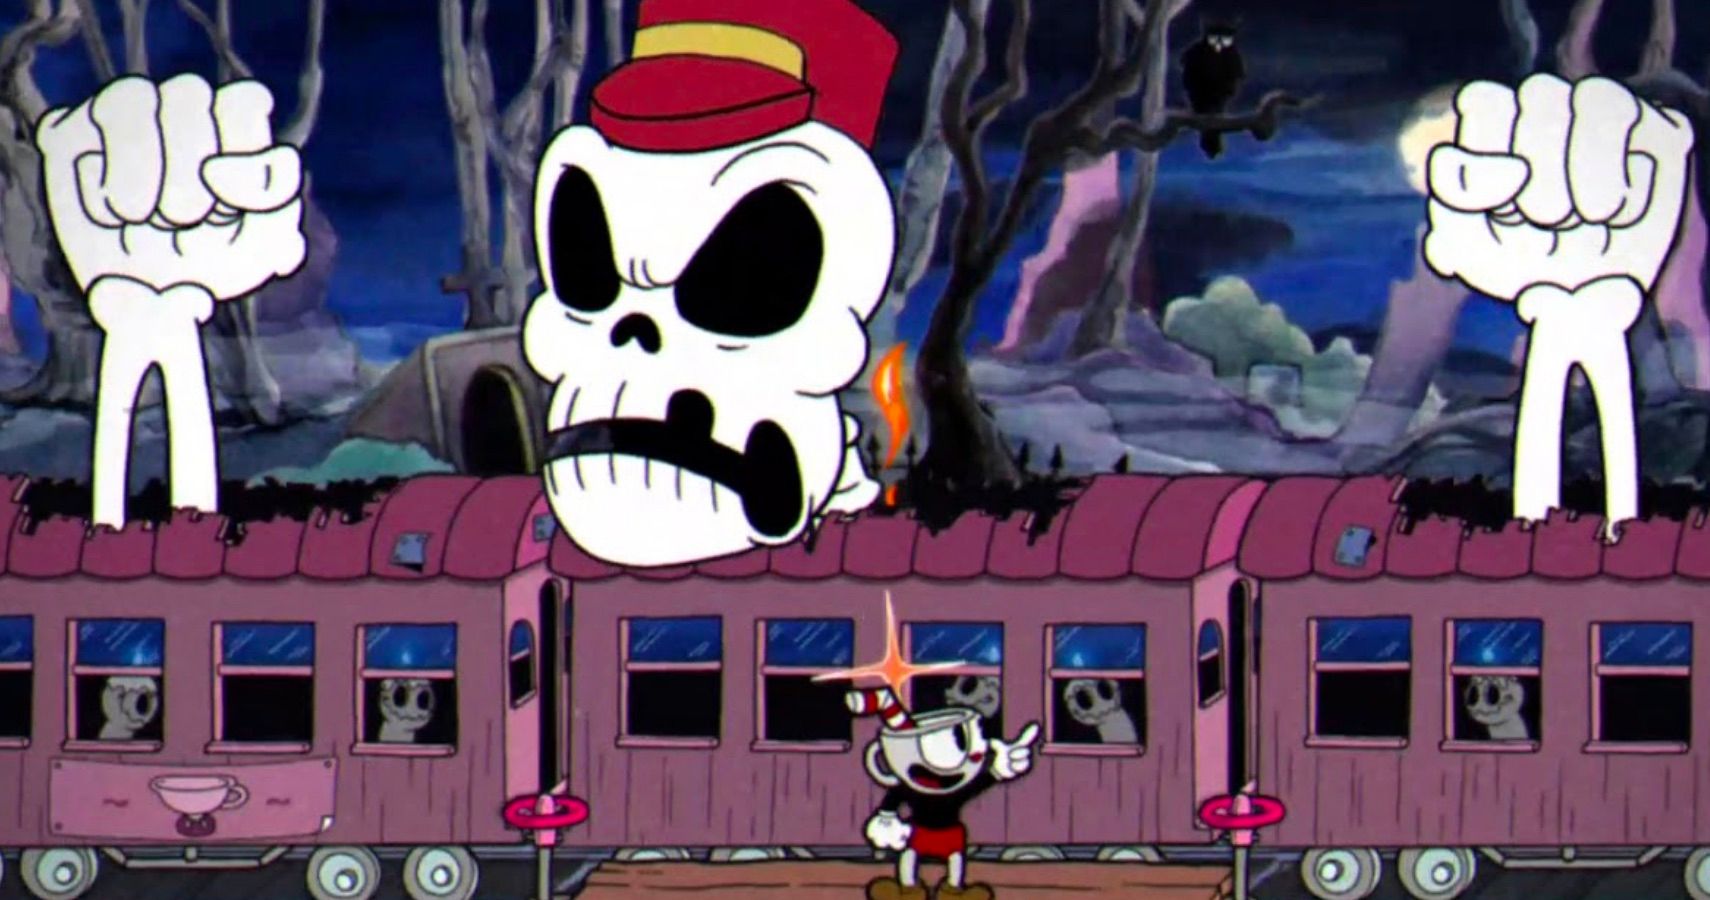 These Are The Spookiest And Scariest Skeletons In Gaming